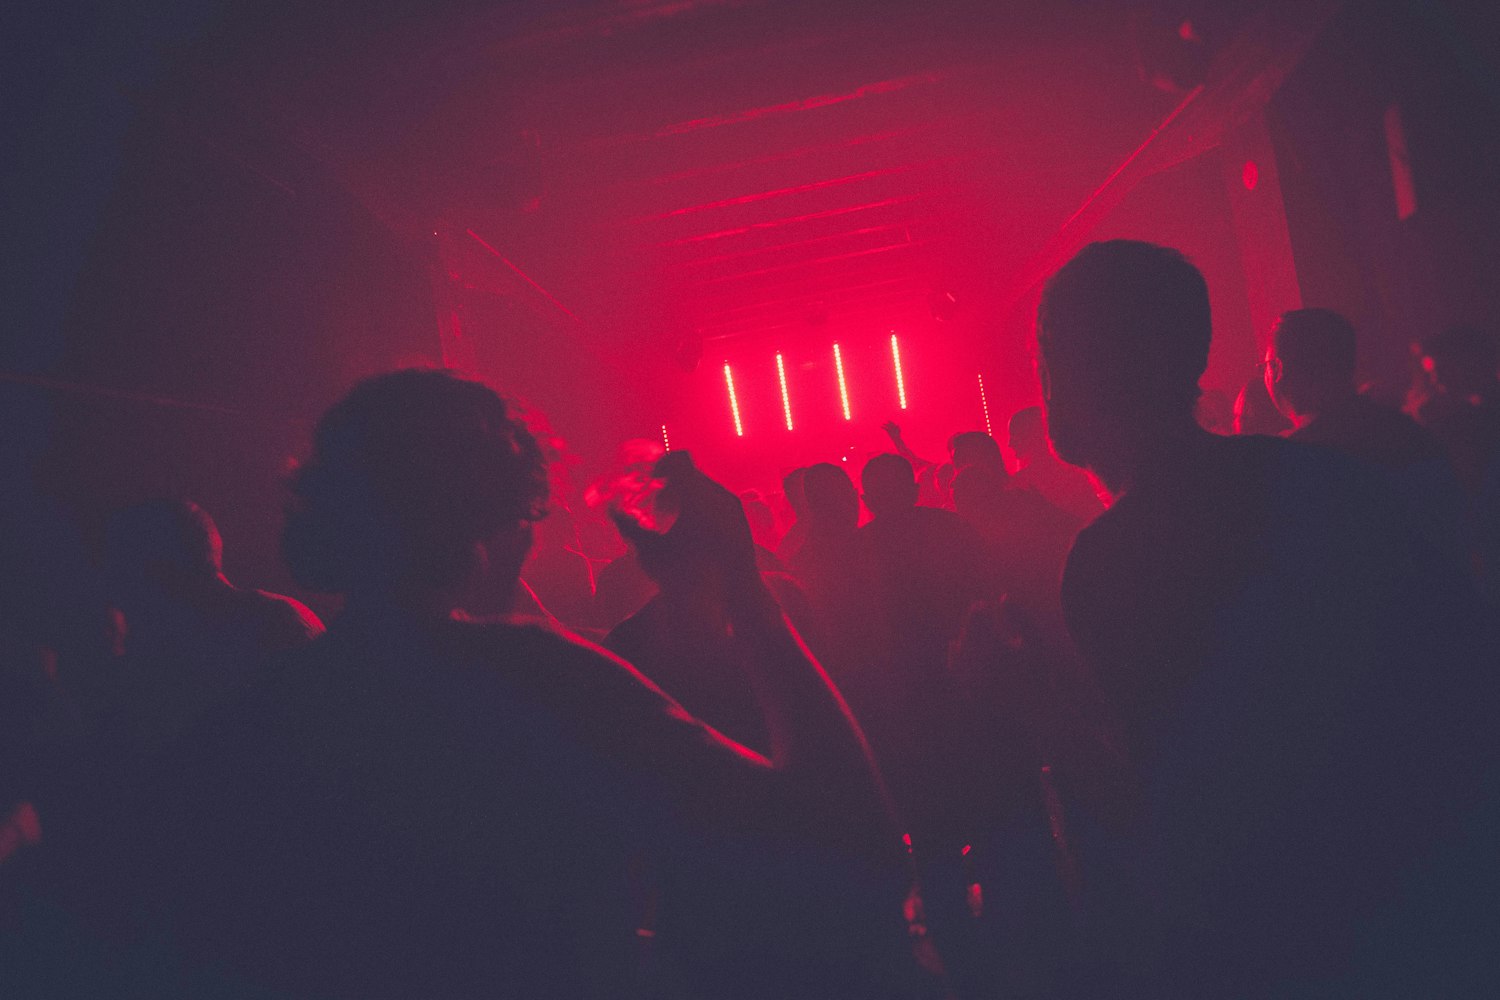 10 of the best clubs in Amsterdam – chosen by the experts